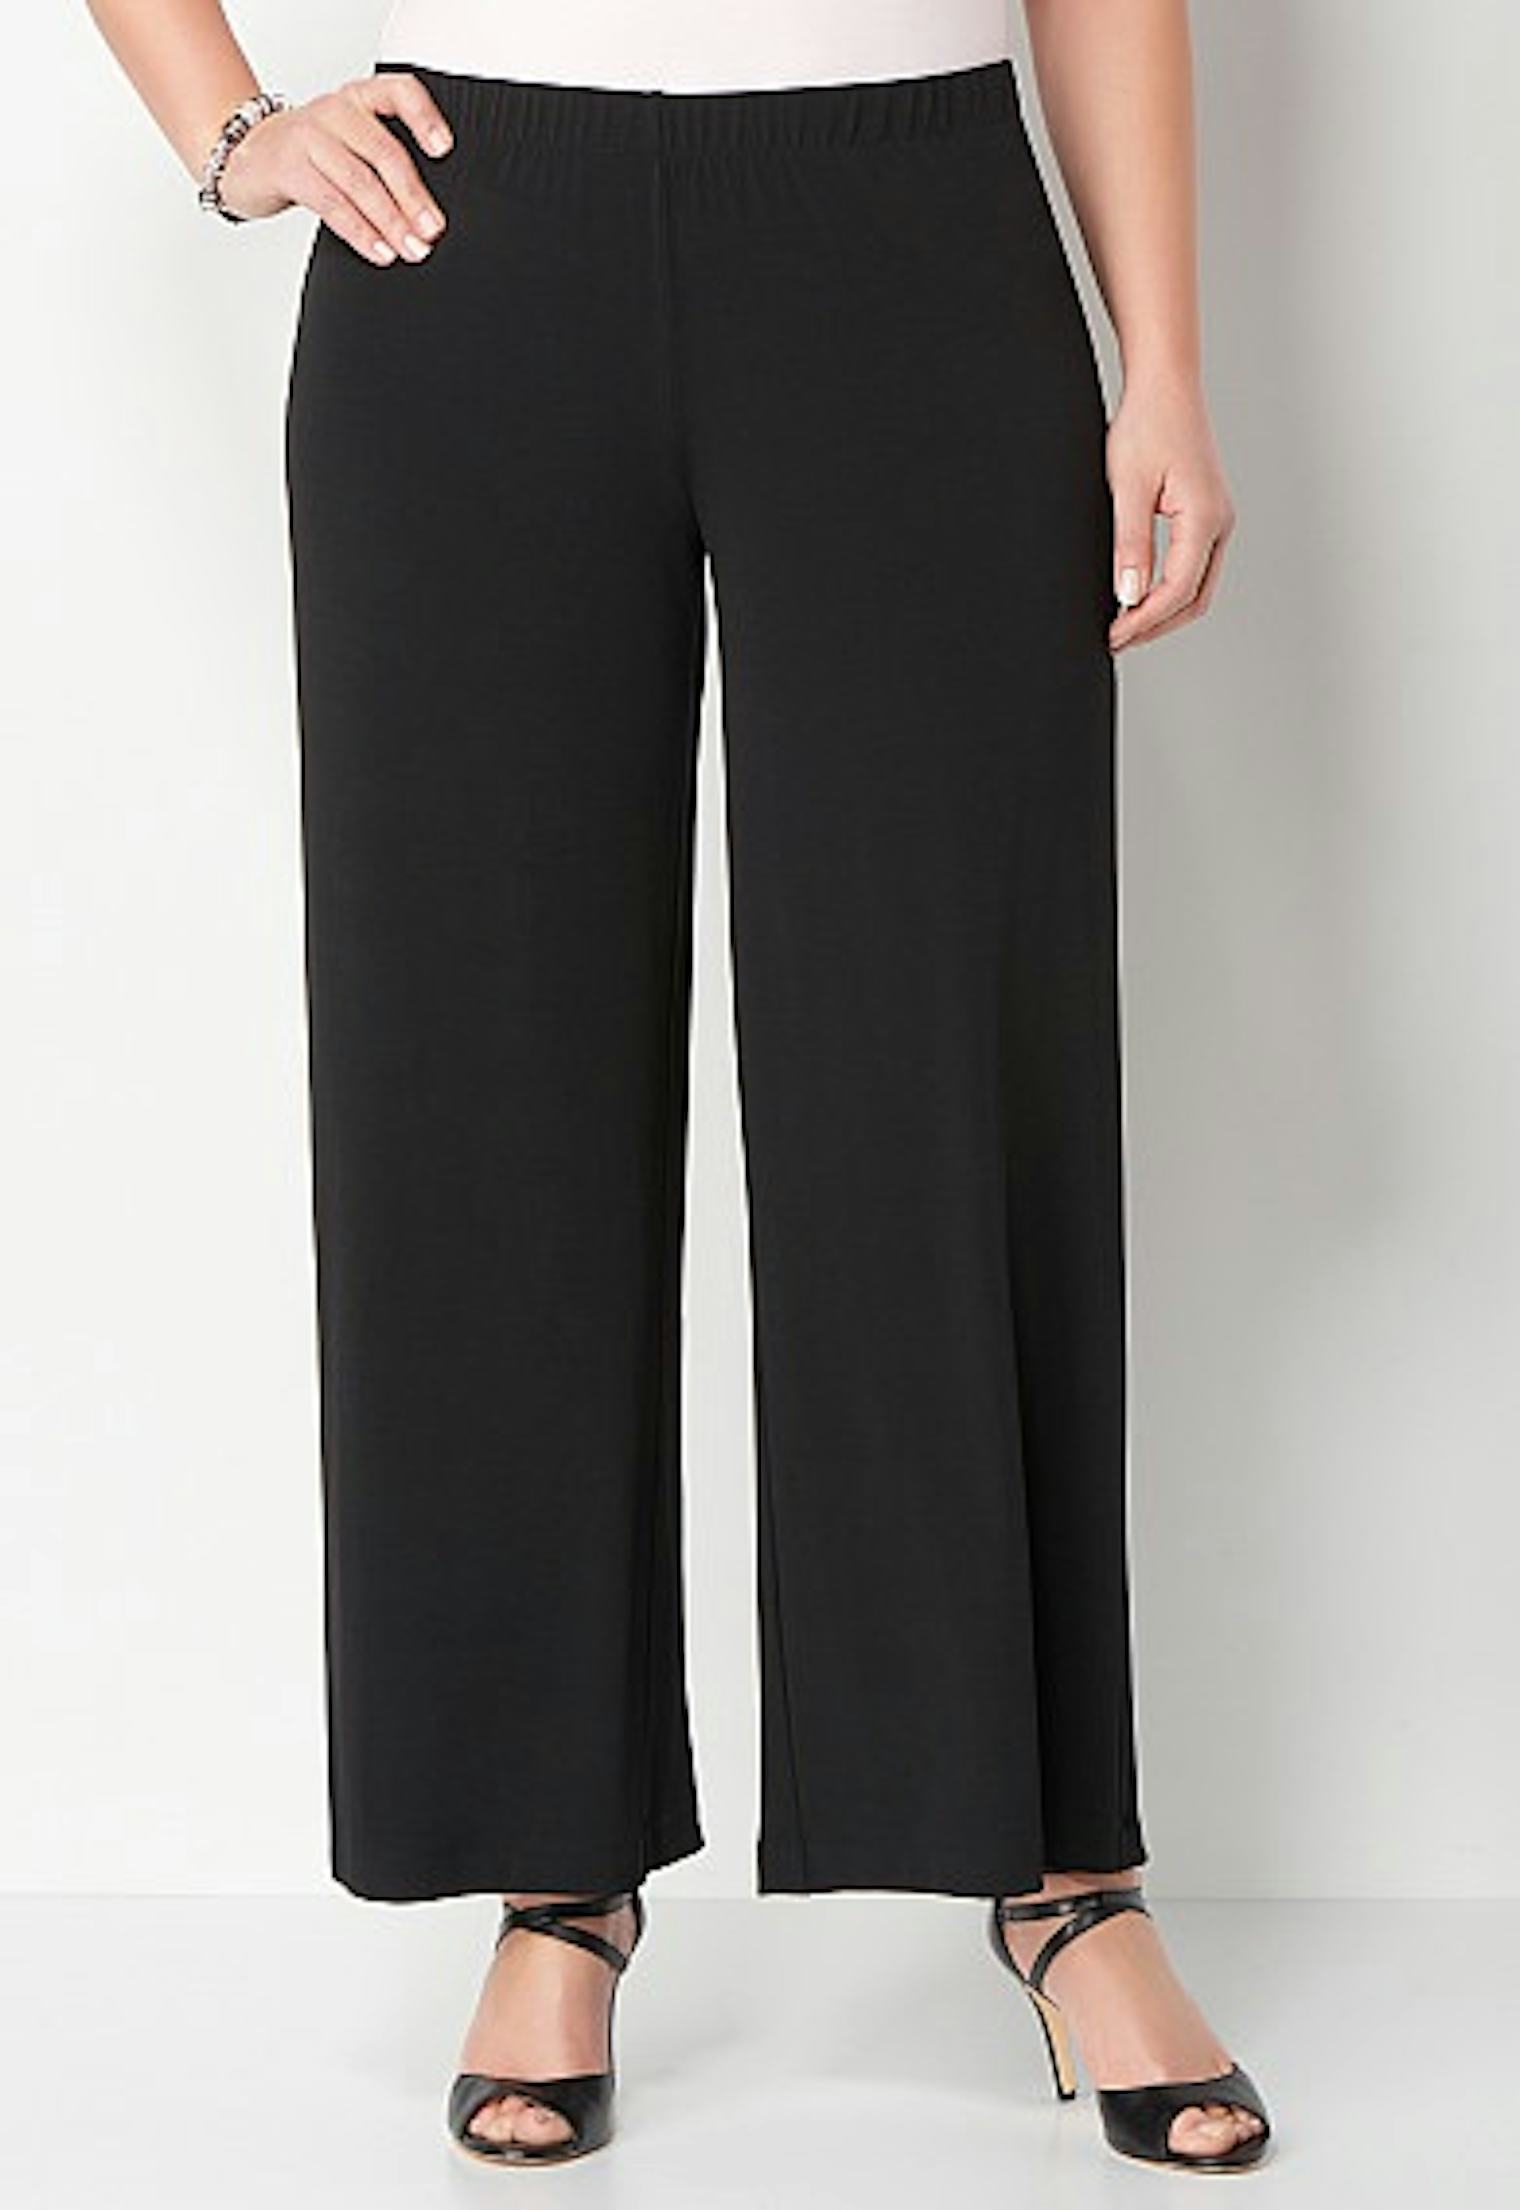 9 Wide Leg Pants That Are Just As Comfortable As Dresses Because ...